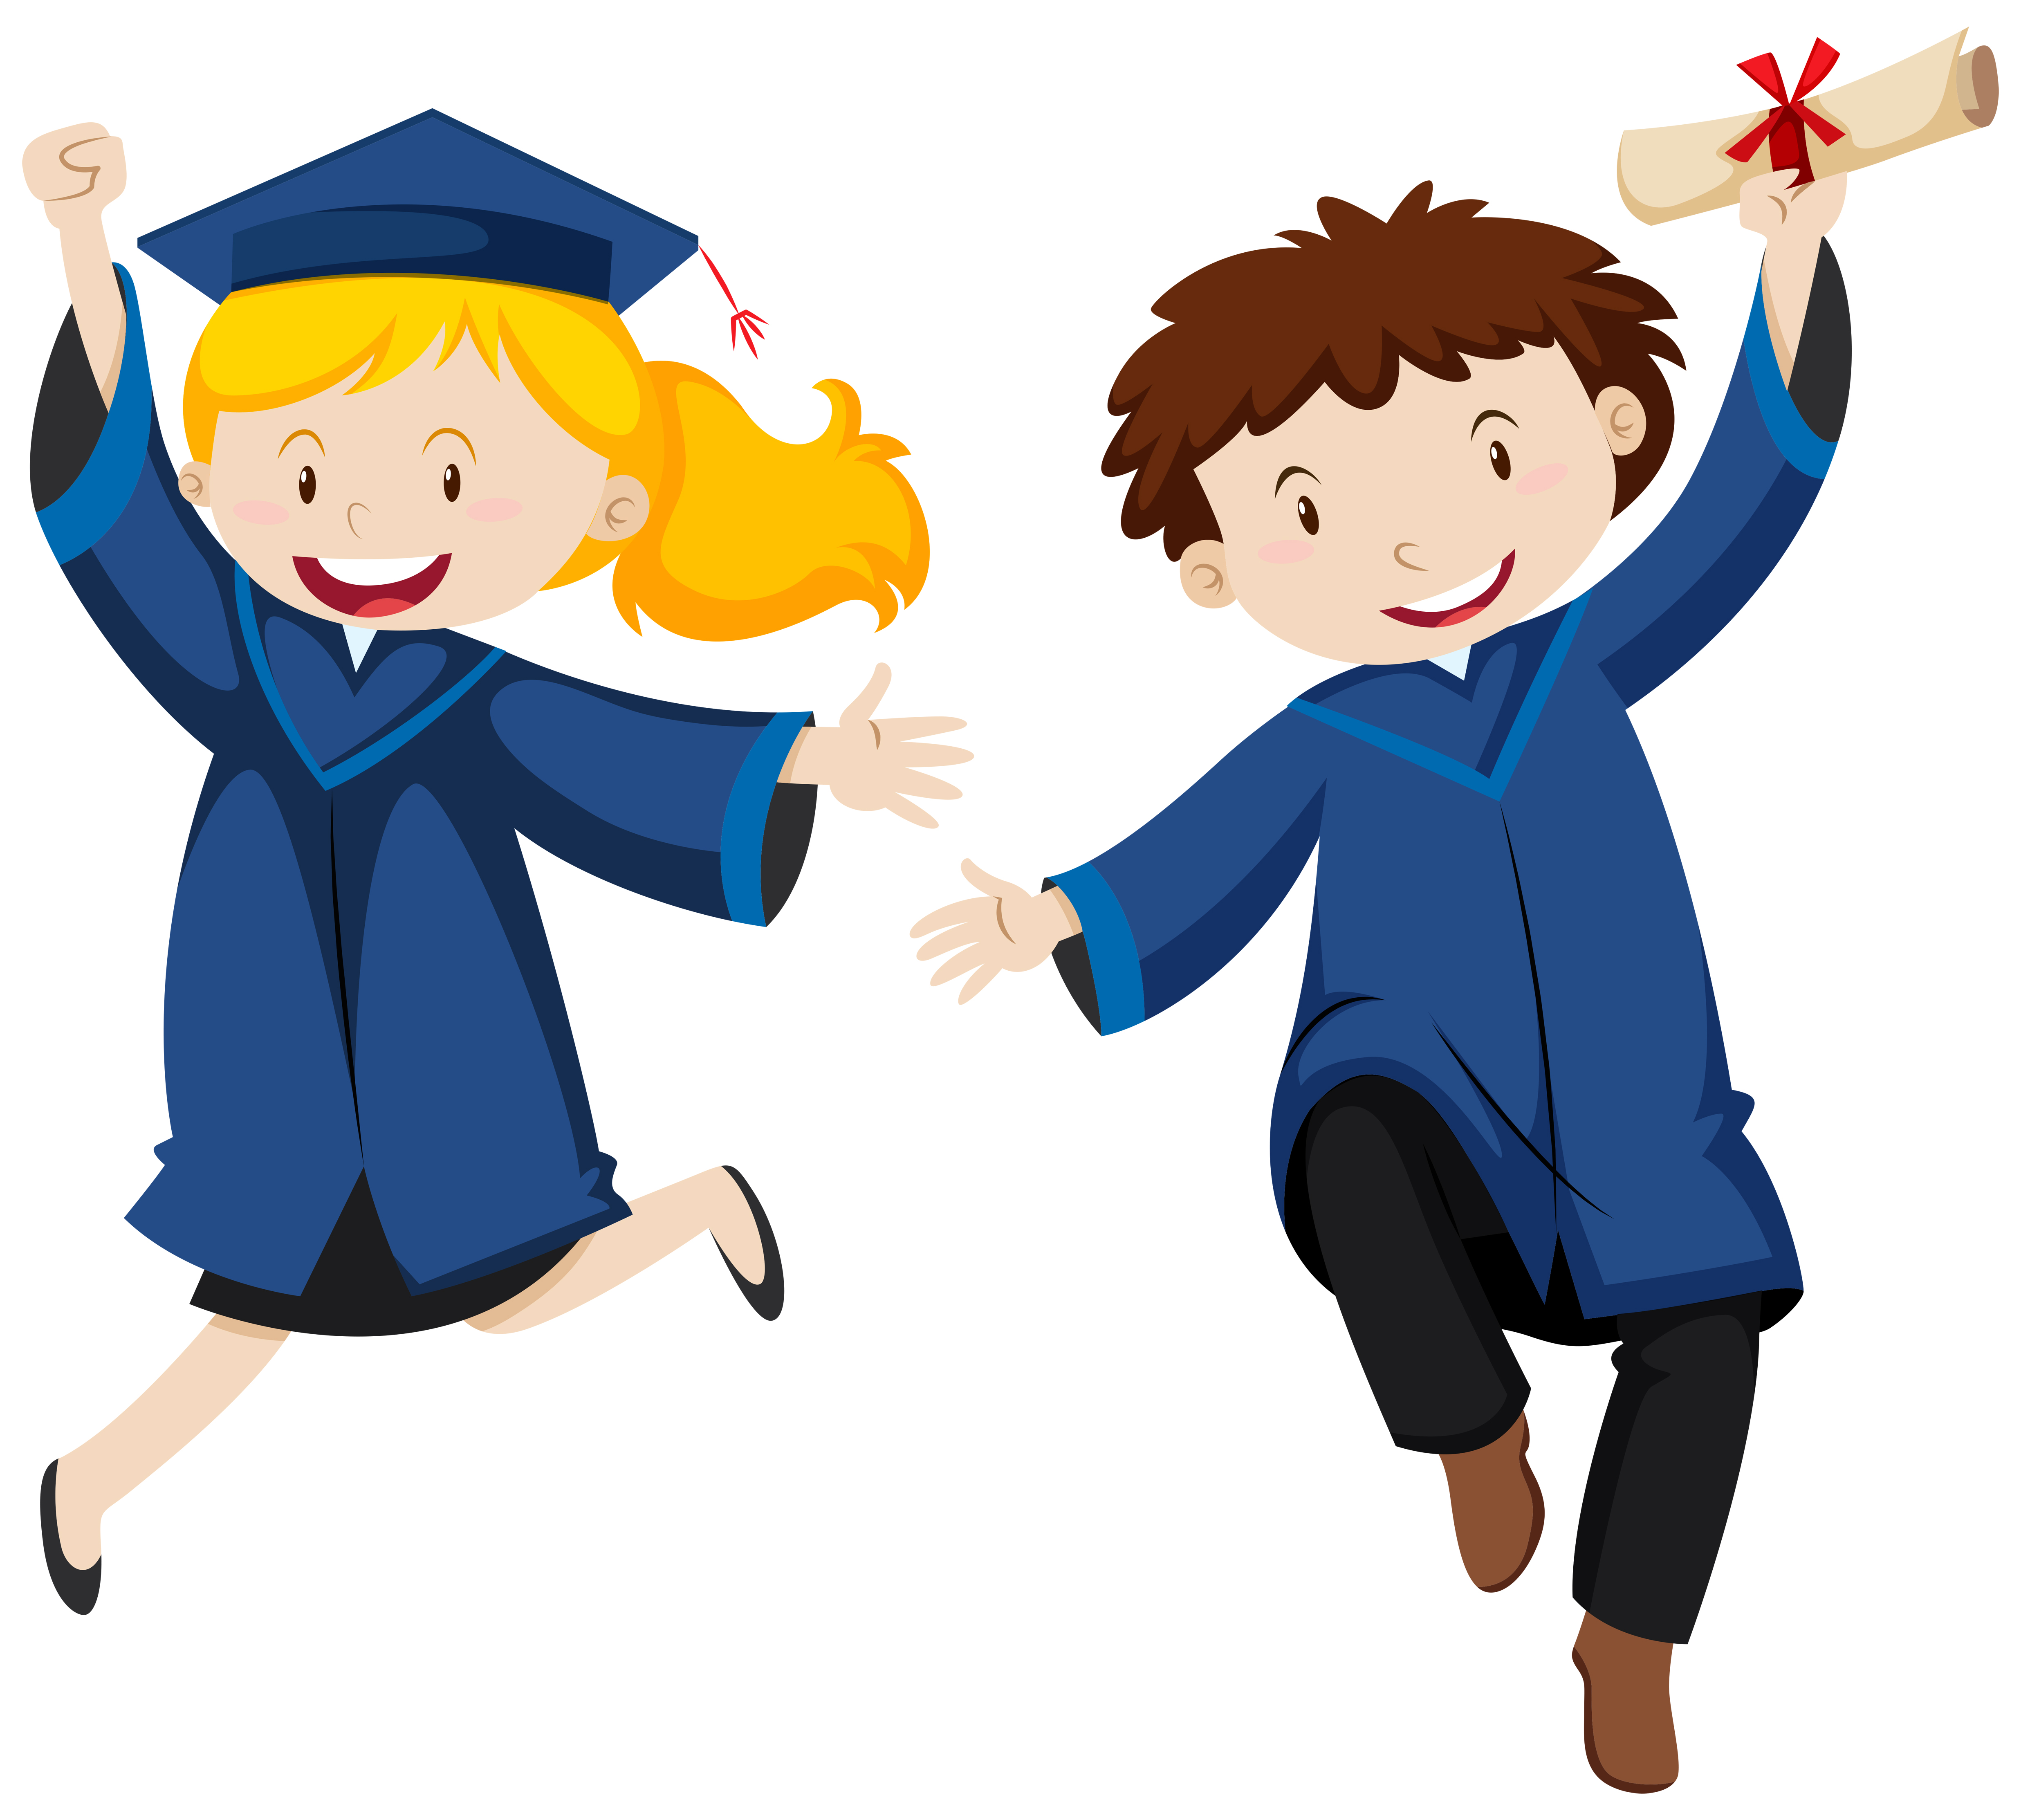 Graduation ceremony with two students 591557 Download Free Vectors Clipart Graphics & Vector Art